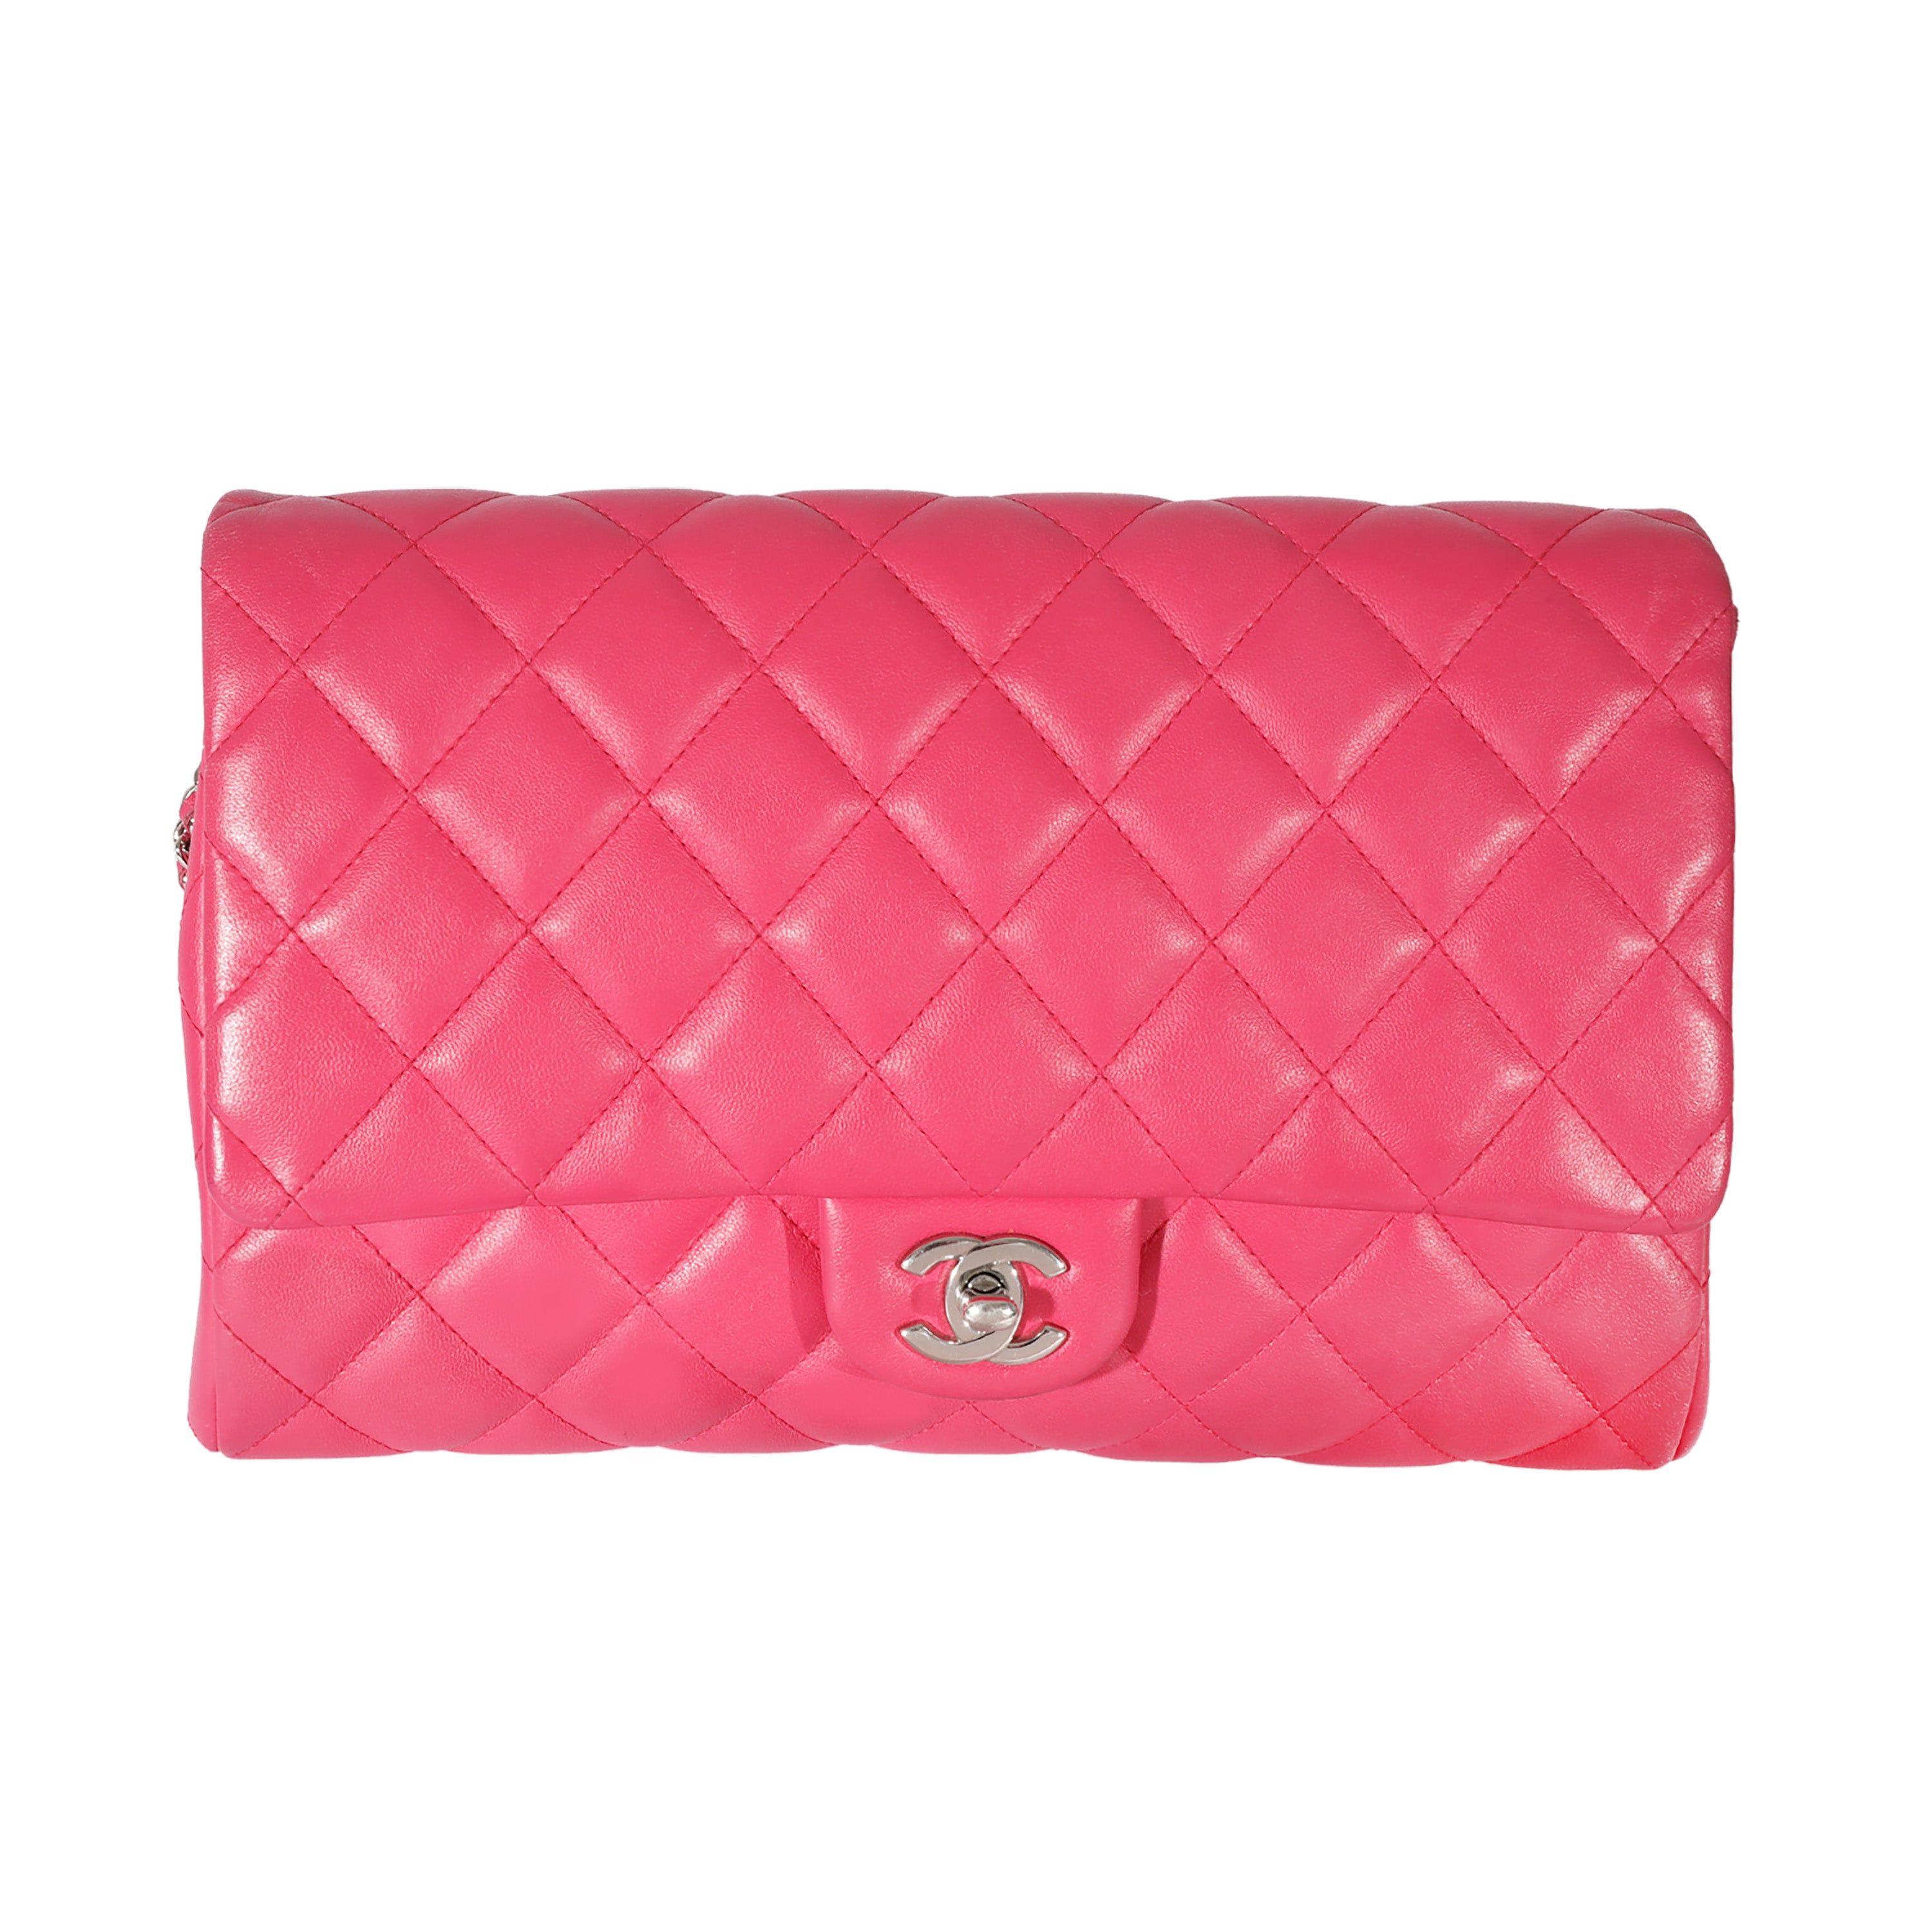 Chanel Pink Lambskin Classic Flap Clutch With Chain